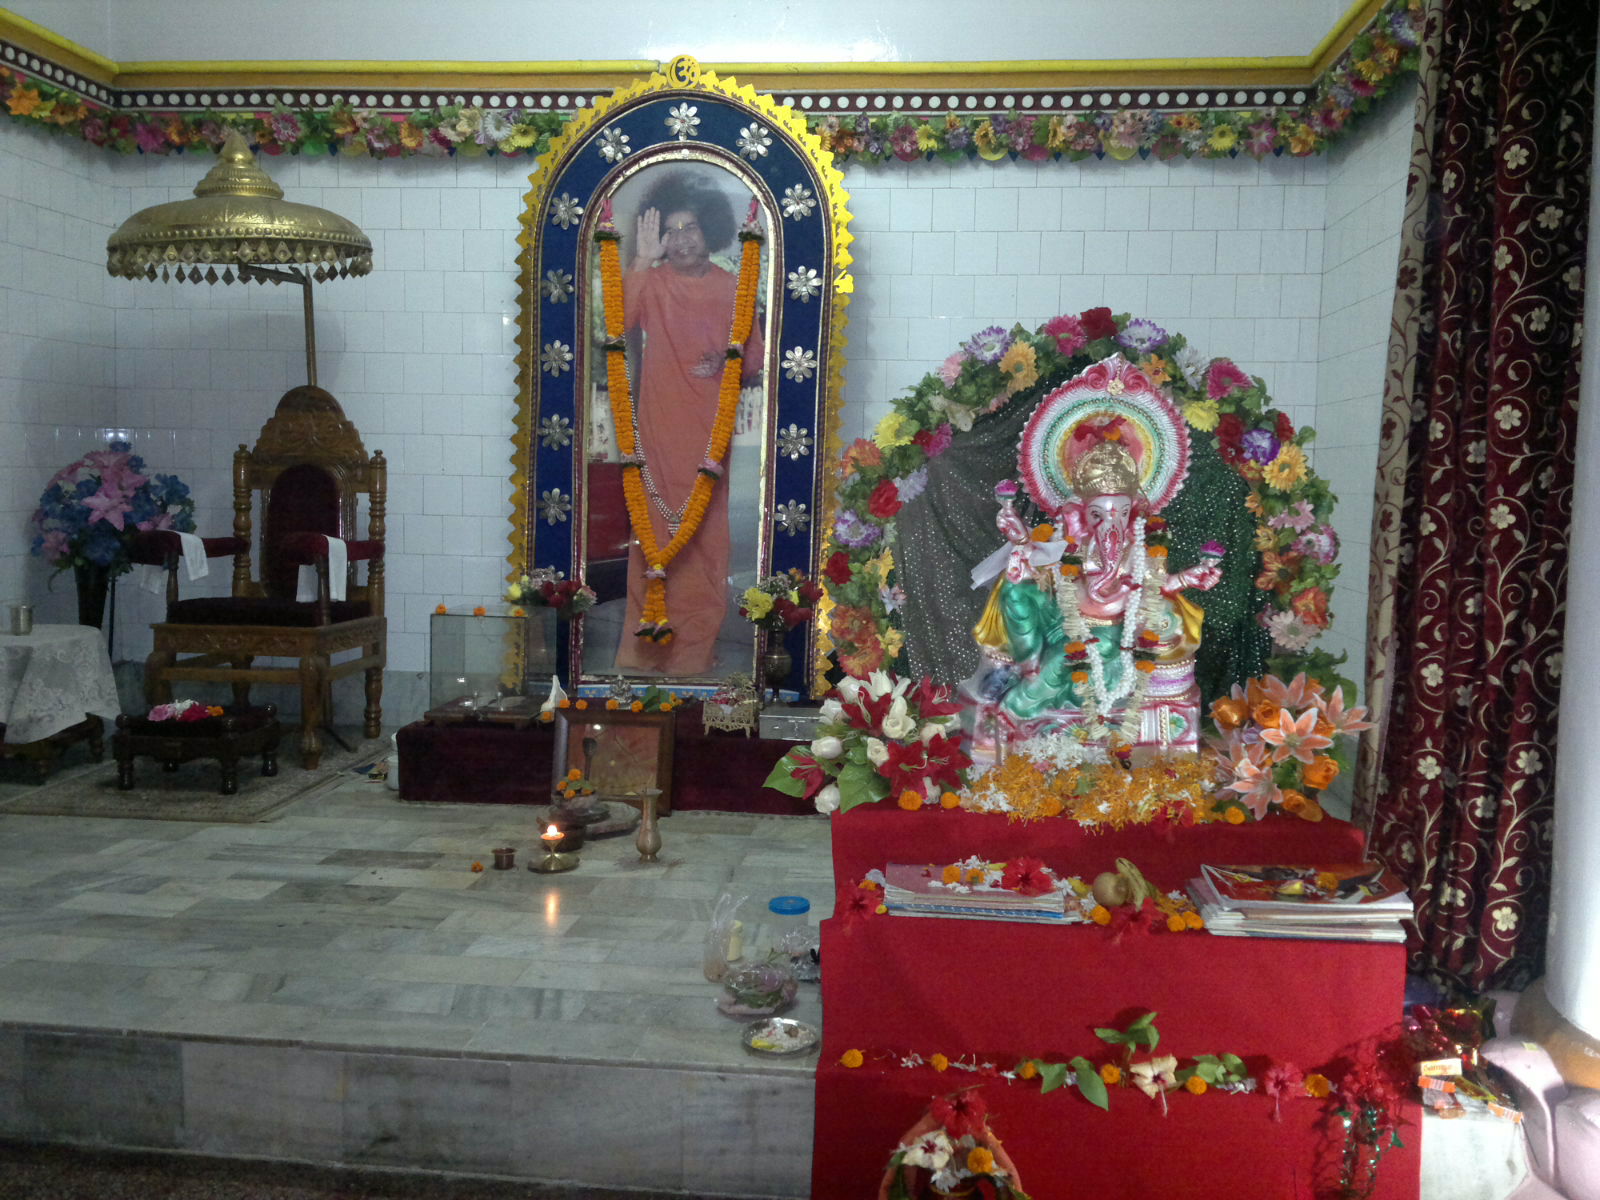 a small shrine with a person inside and lots of decorations